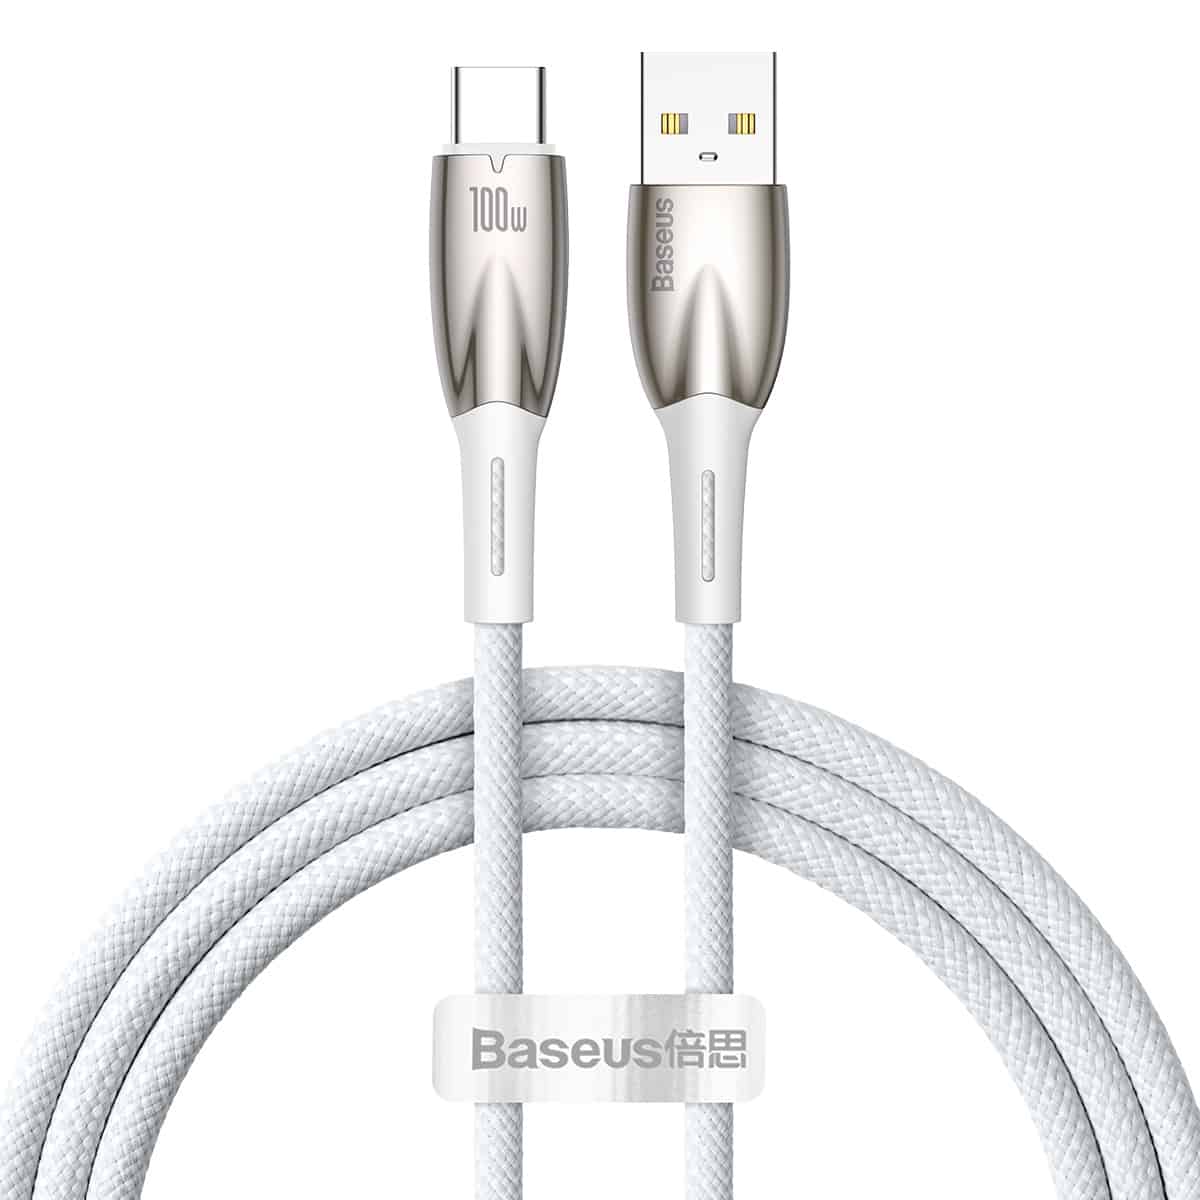 Baseus Glimmer Series Fast Charging Data Cable USB to Type-C 100W